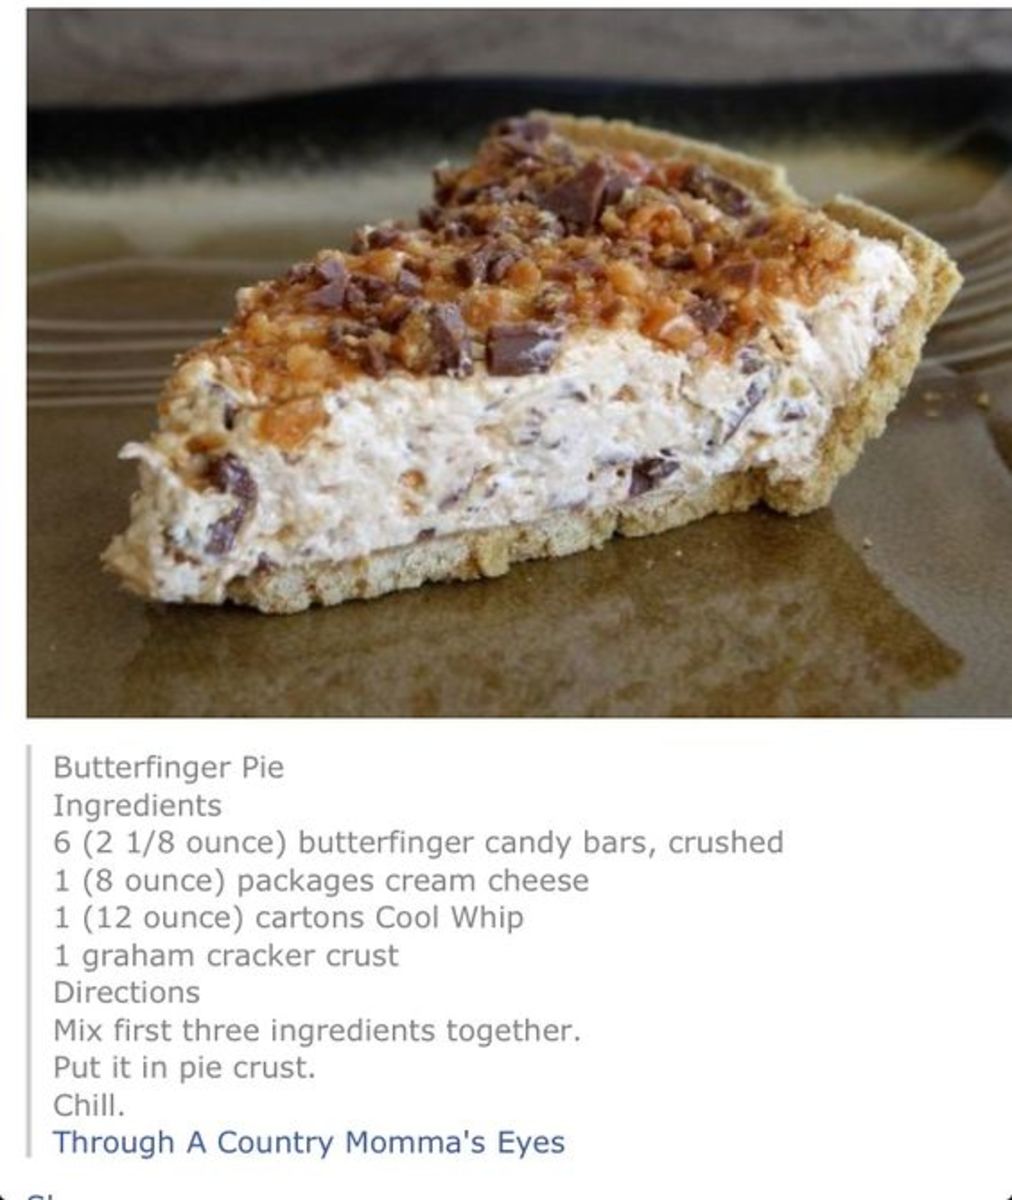 50+ Cheap and Easy Christmas Desserts Your Family Will Love - HubPages